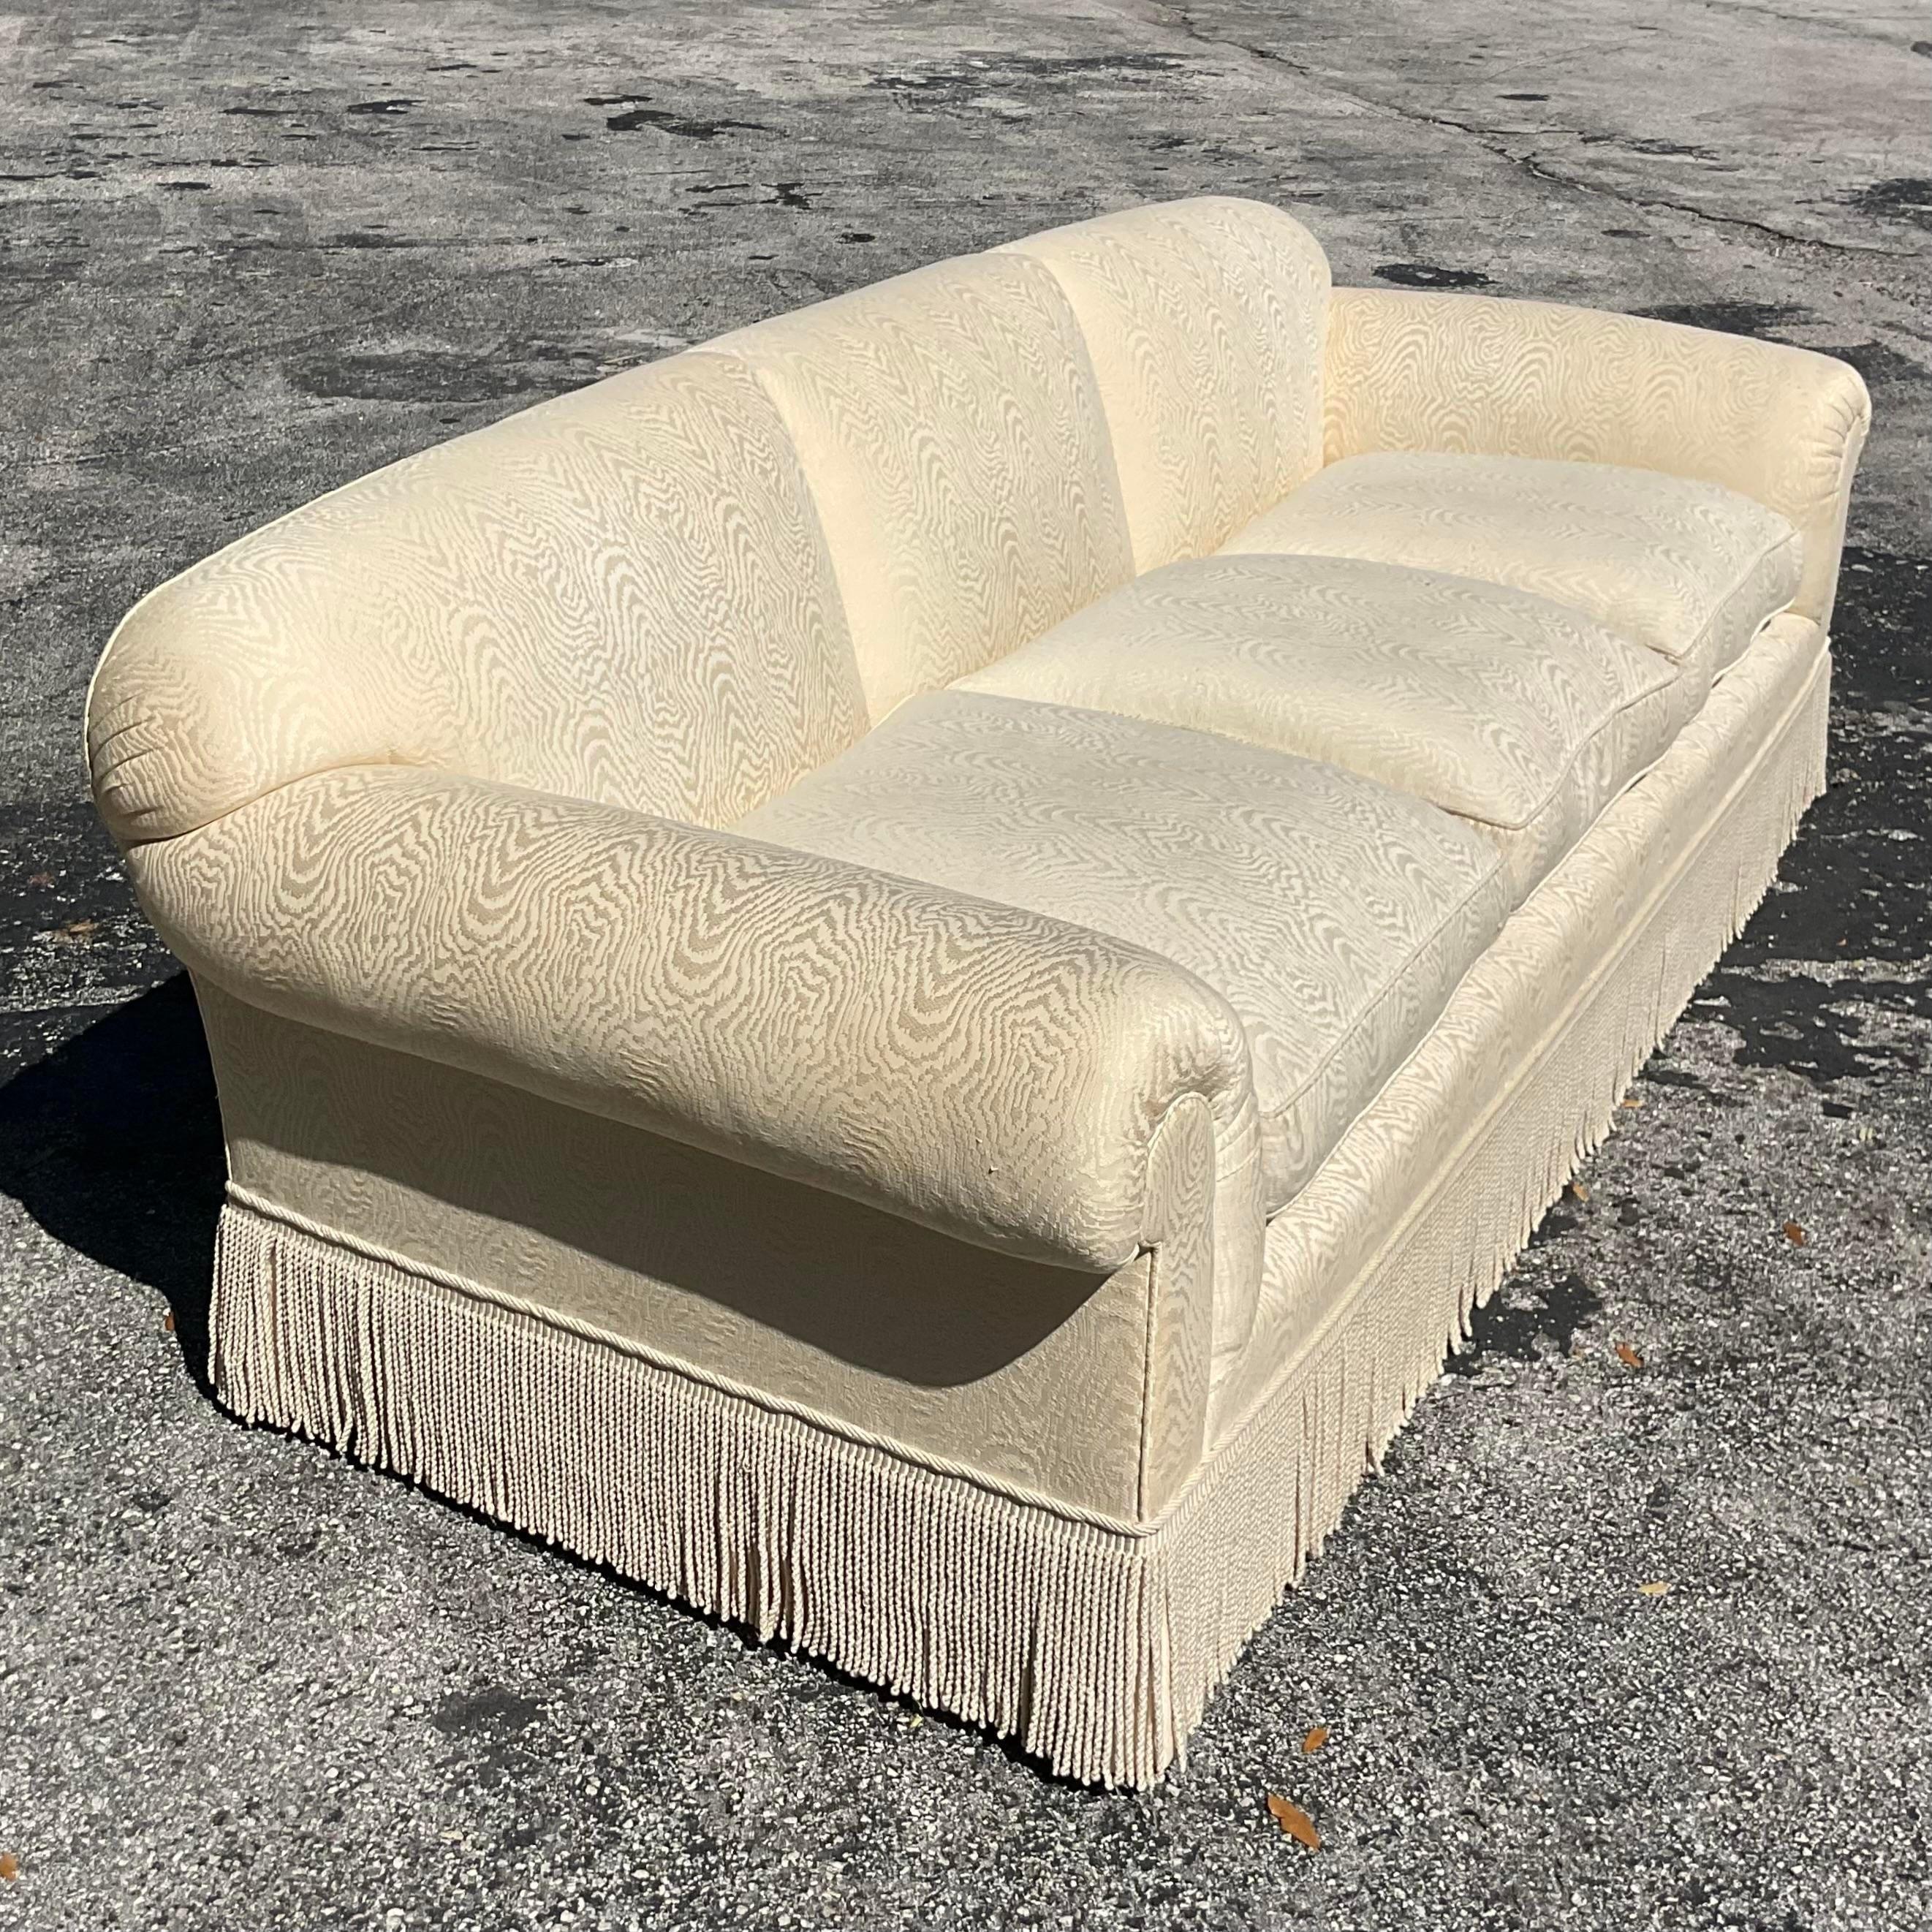 Incredible vintage custom Bunny Williams sofa with abstract wood grain damask fabric surrounded in the base with tonal twist bullion trim. Unmarked. This is a custom sofa for a private client of a bunny Williams. The entire sofa is outlined in